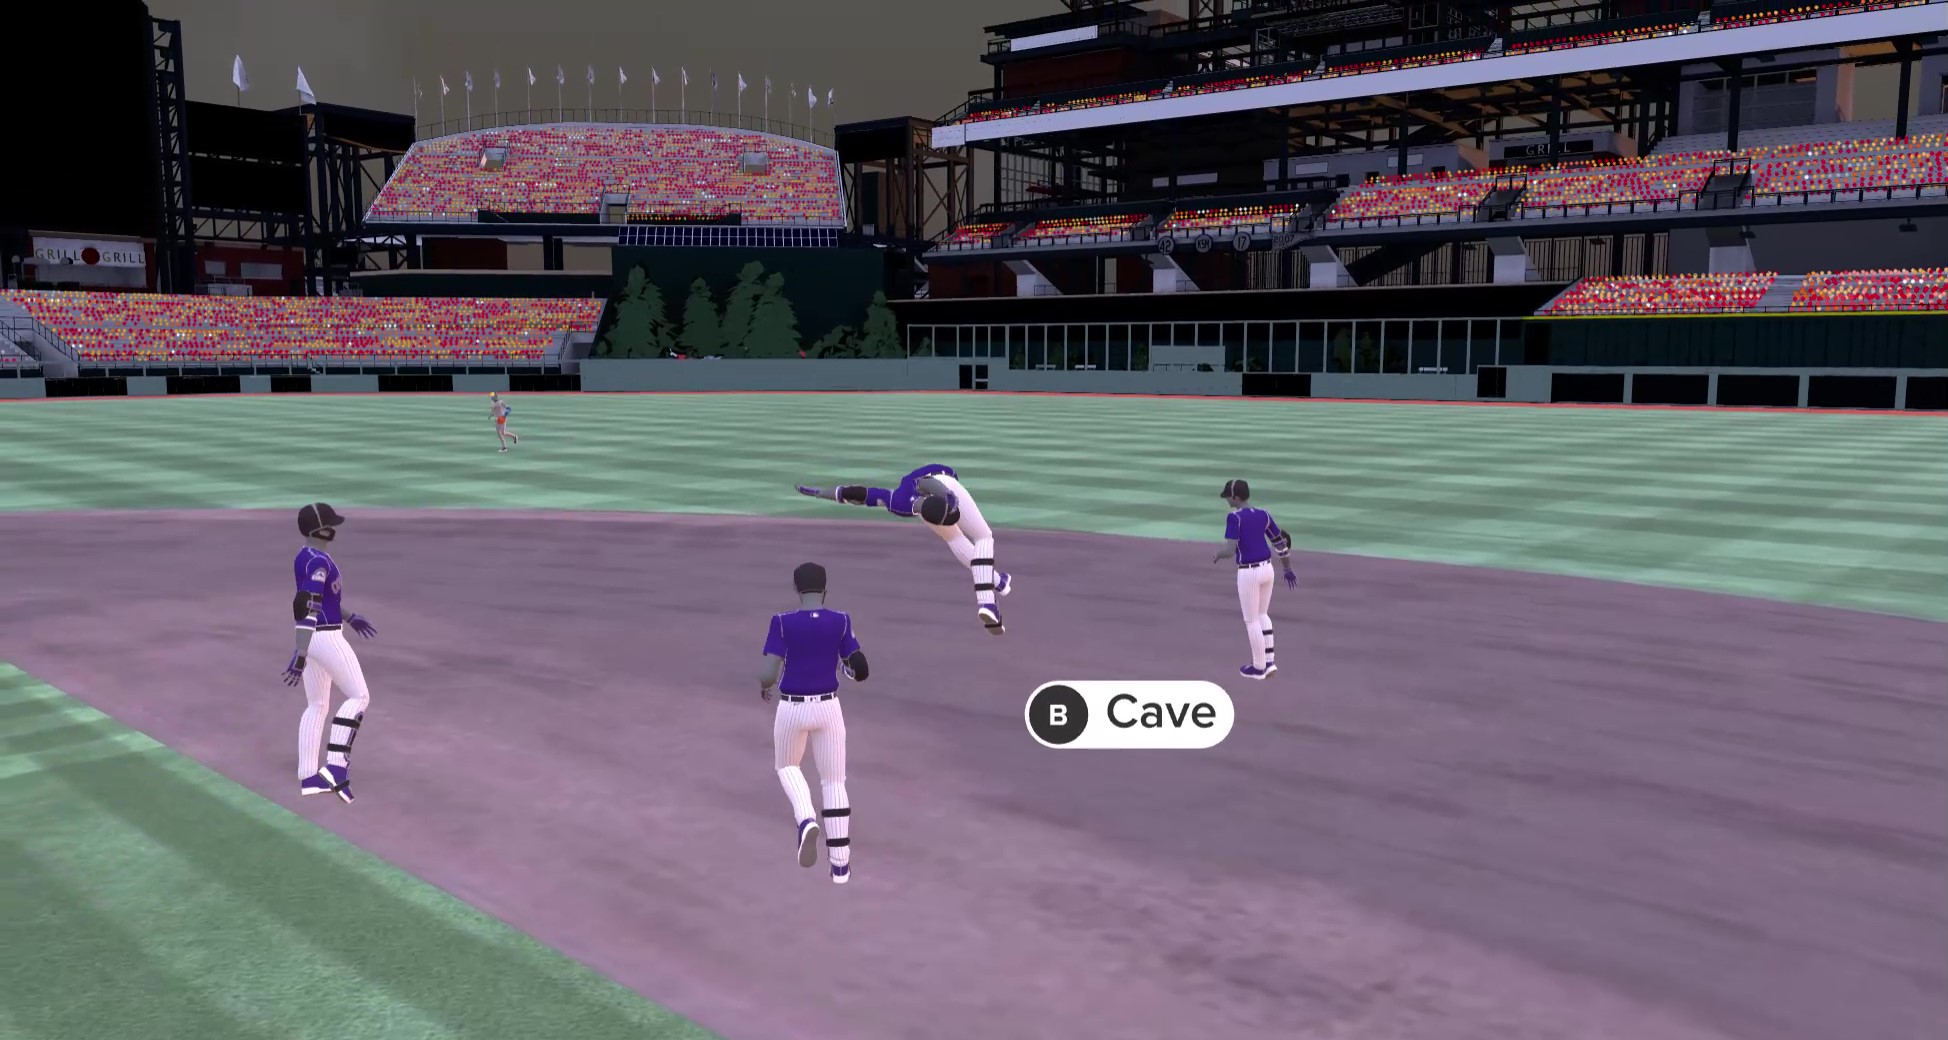 A 3D model of Jake Cave among his teammates is contorted beyond human bounds.